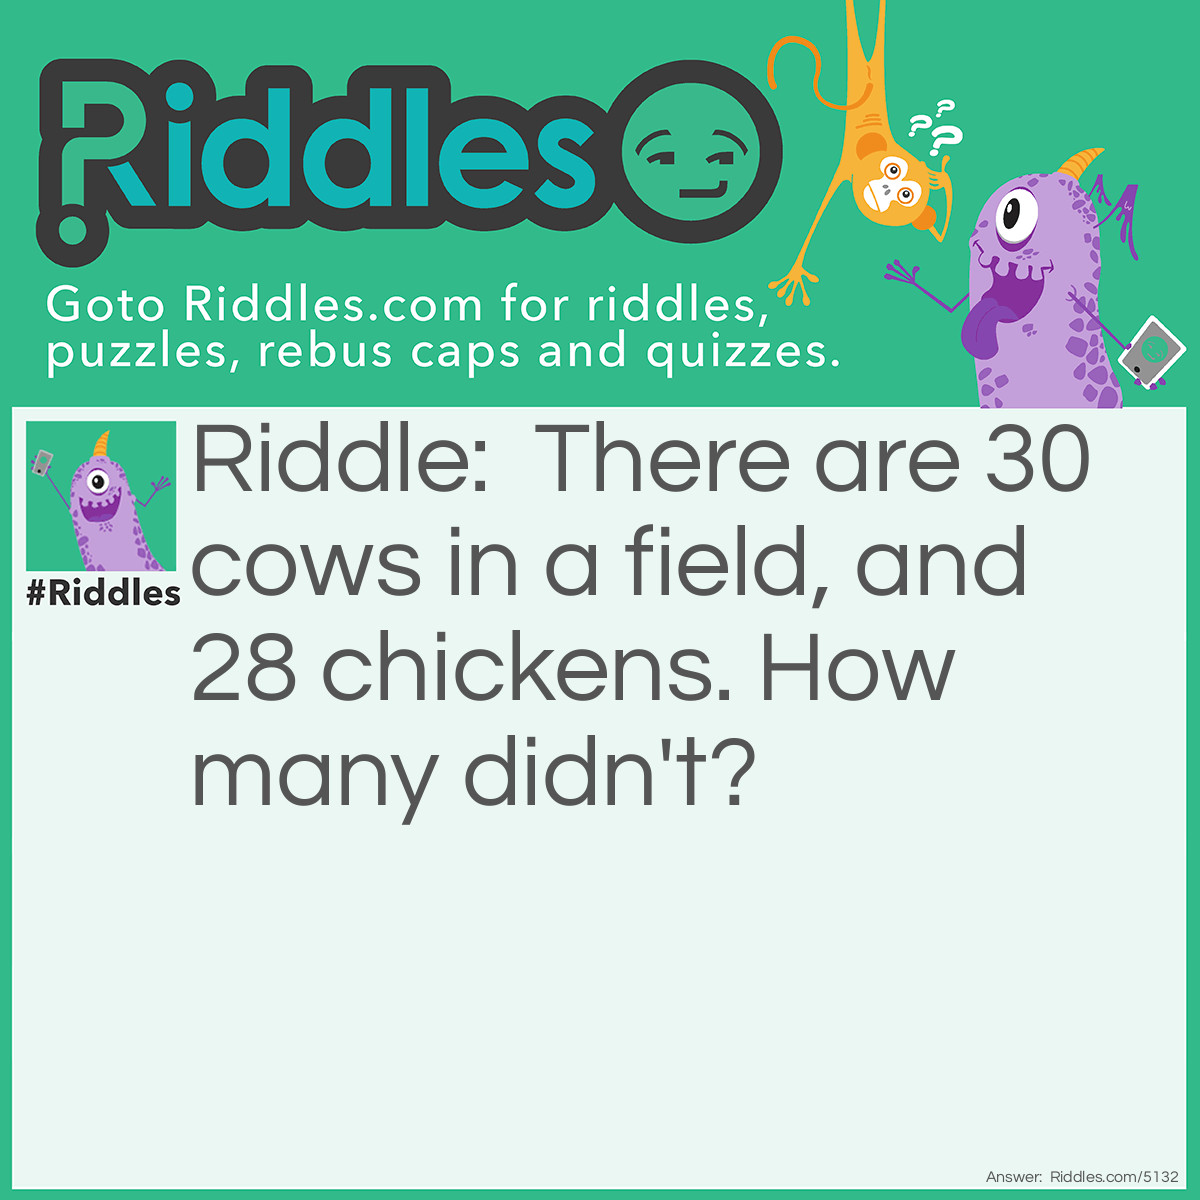 Riddle: There are 30 cows in a field, and 28 chickens. How many didn't? Answer: 10. Listen closely: 30 cows and twenty-eight chickens. Say EIGHT and ATE. They sound the same. Therefore, it means 20 ATE chickens. 30-20=10, so 10 cows didn't eat any chickens.